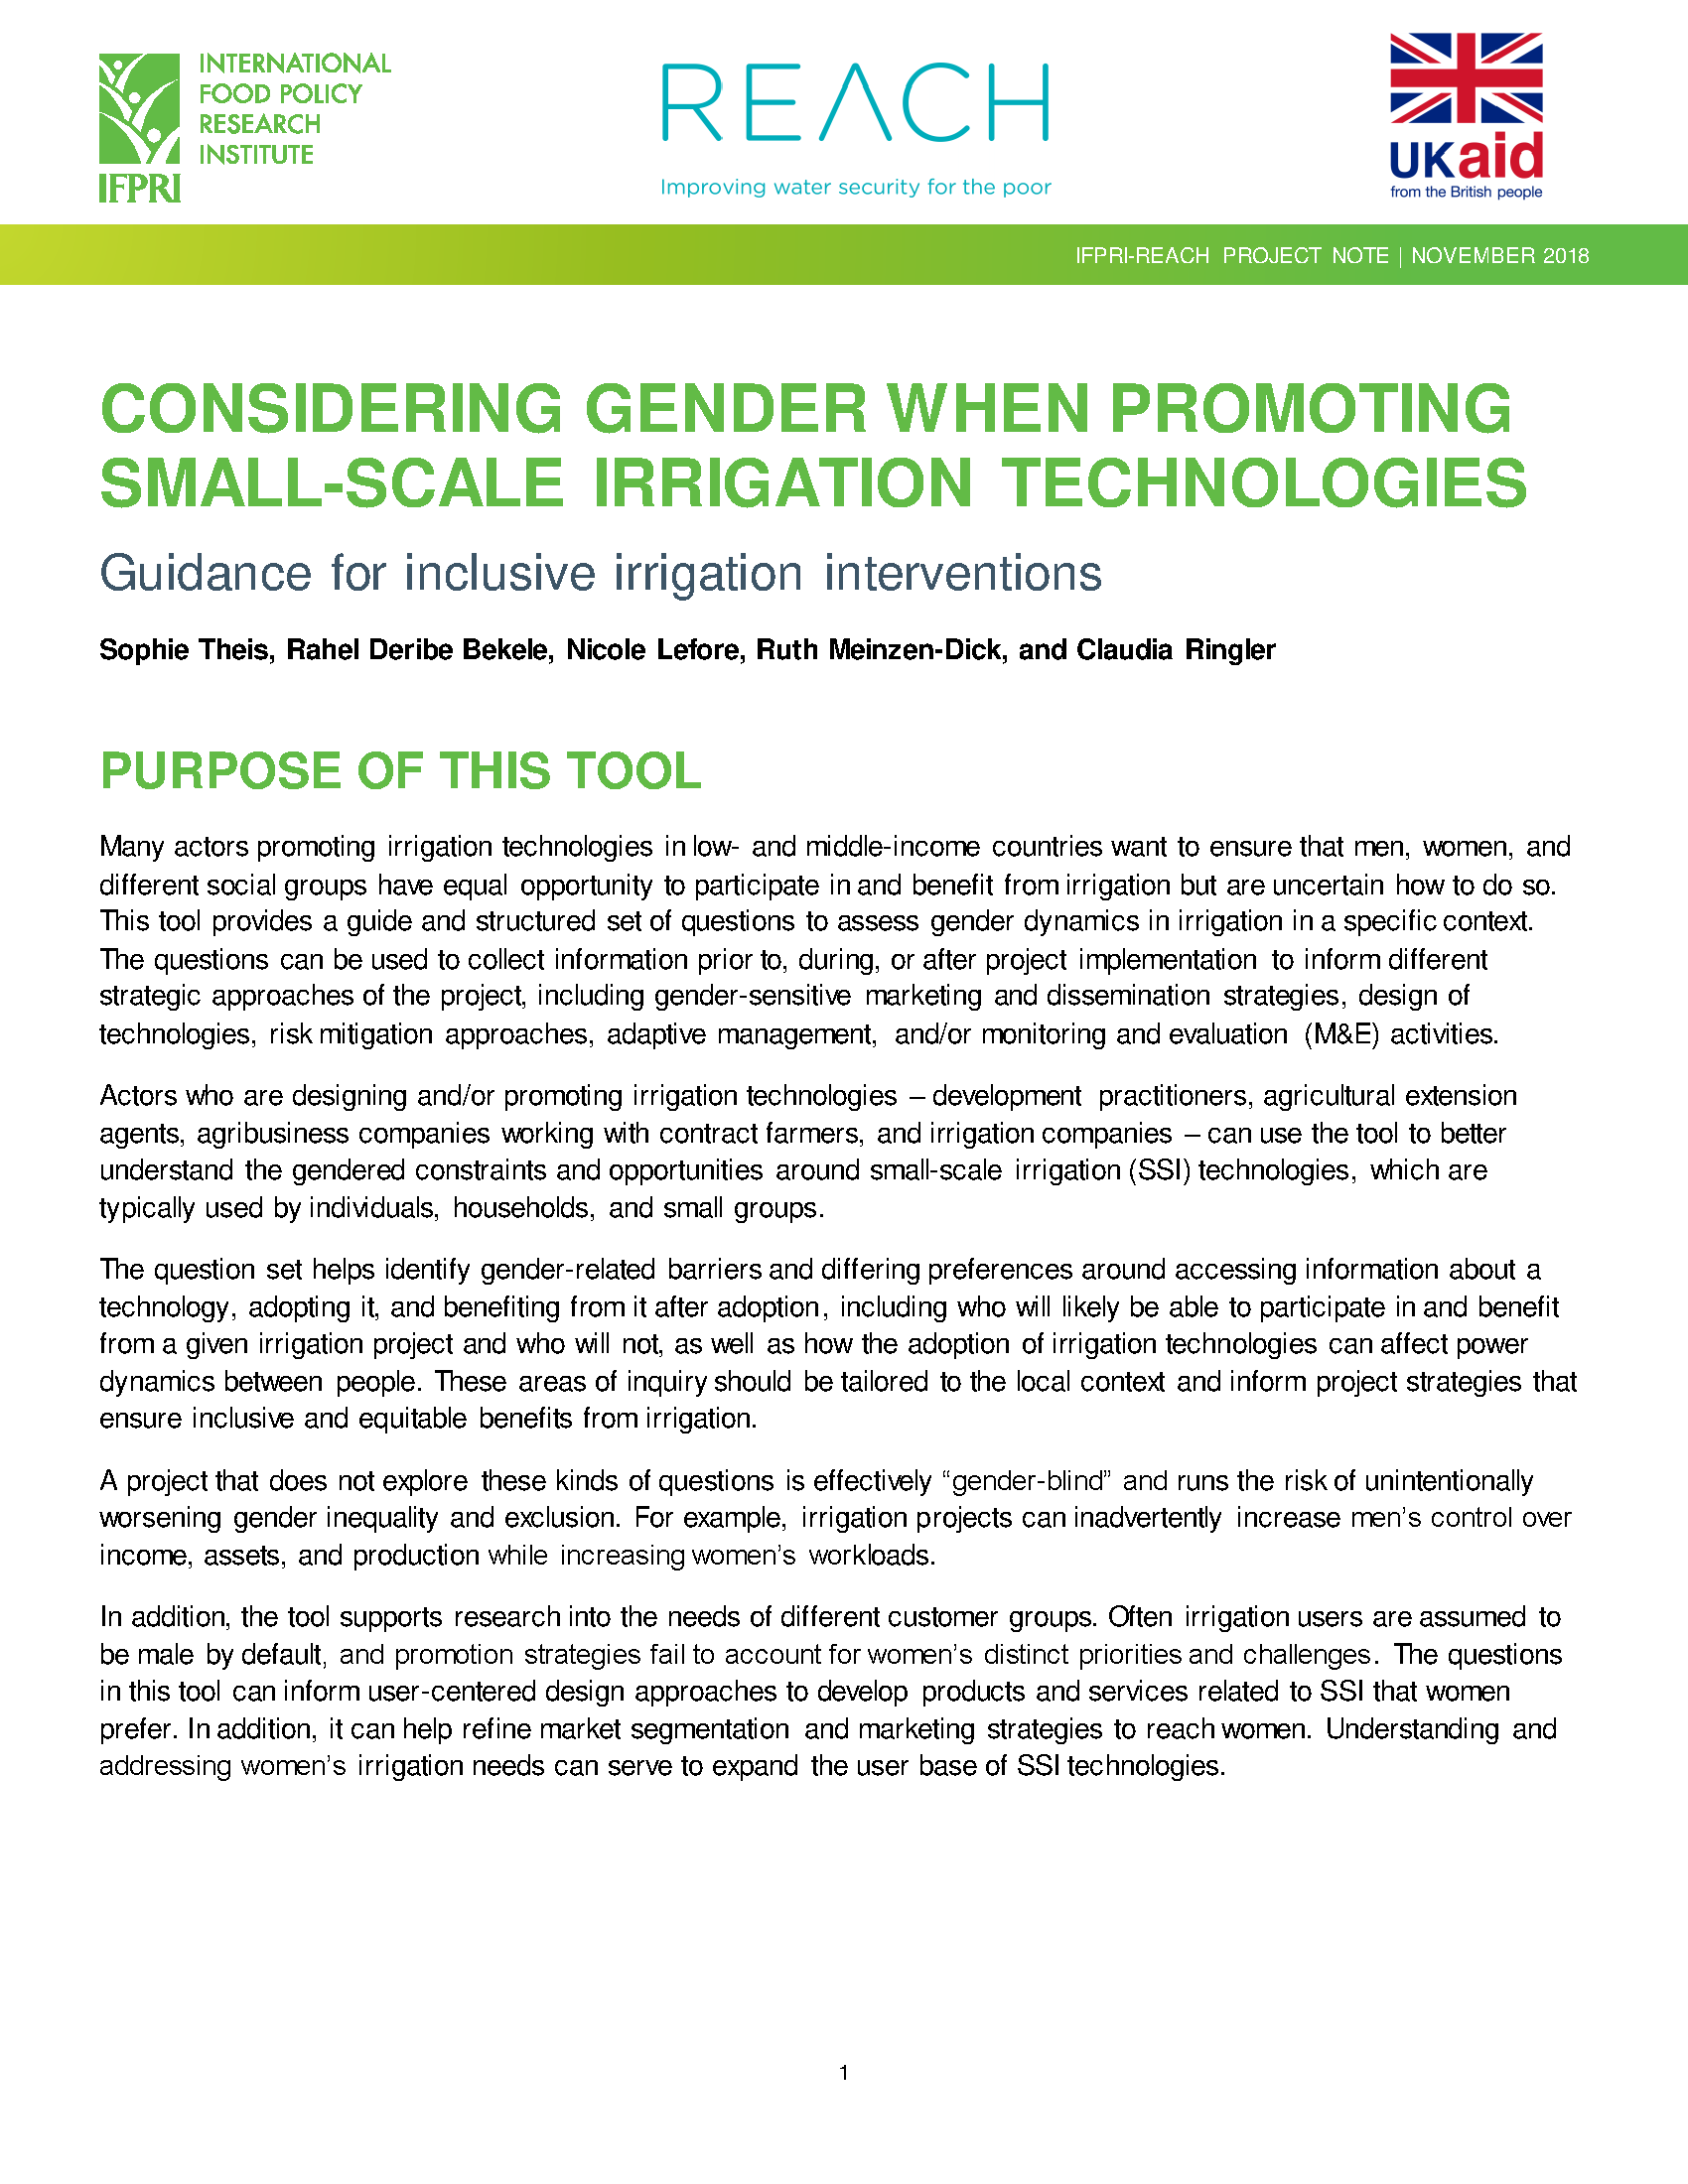 Considering gender when promoting small-scale irrigation technologies: guidance for inclusive irrigation interventions